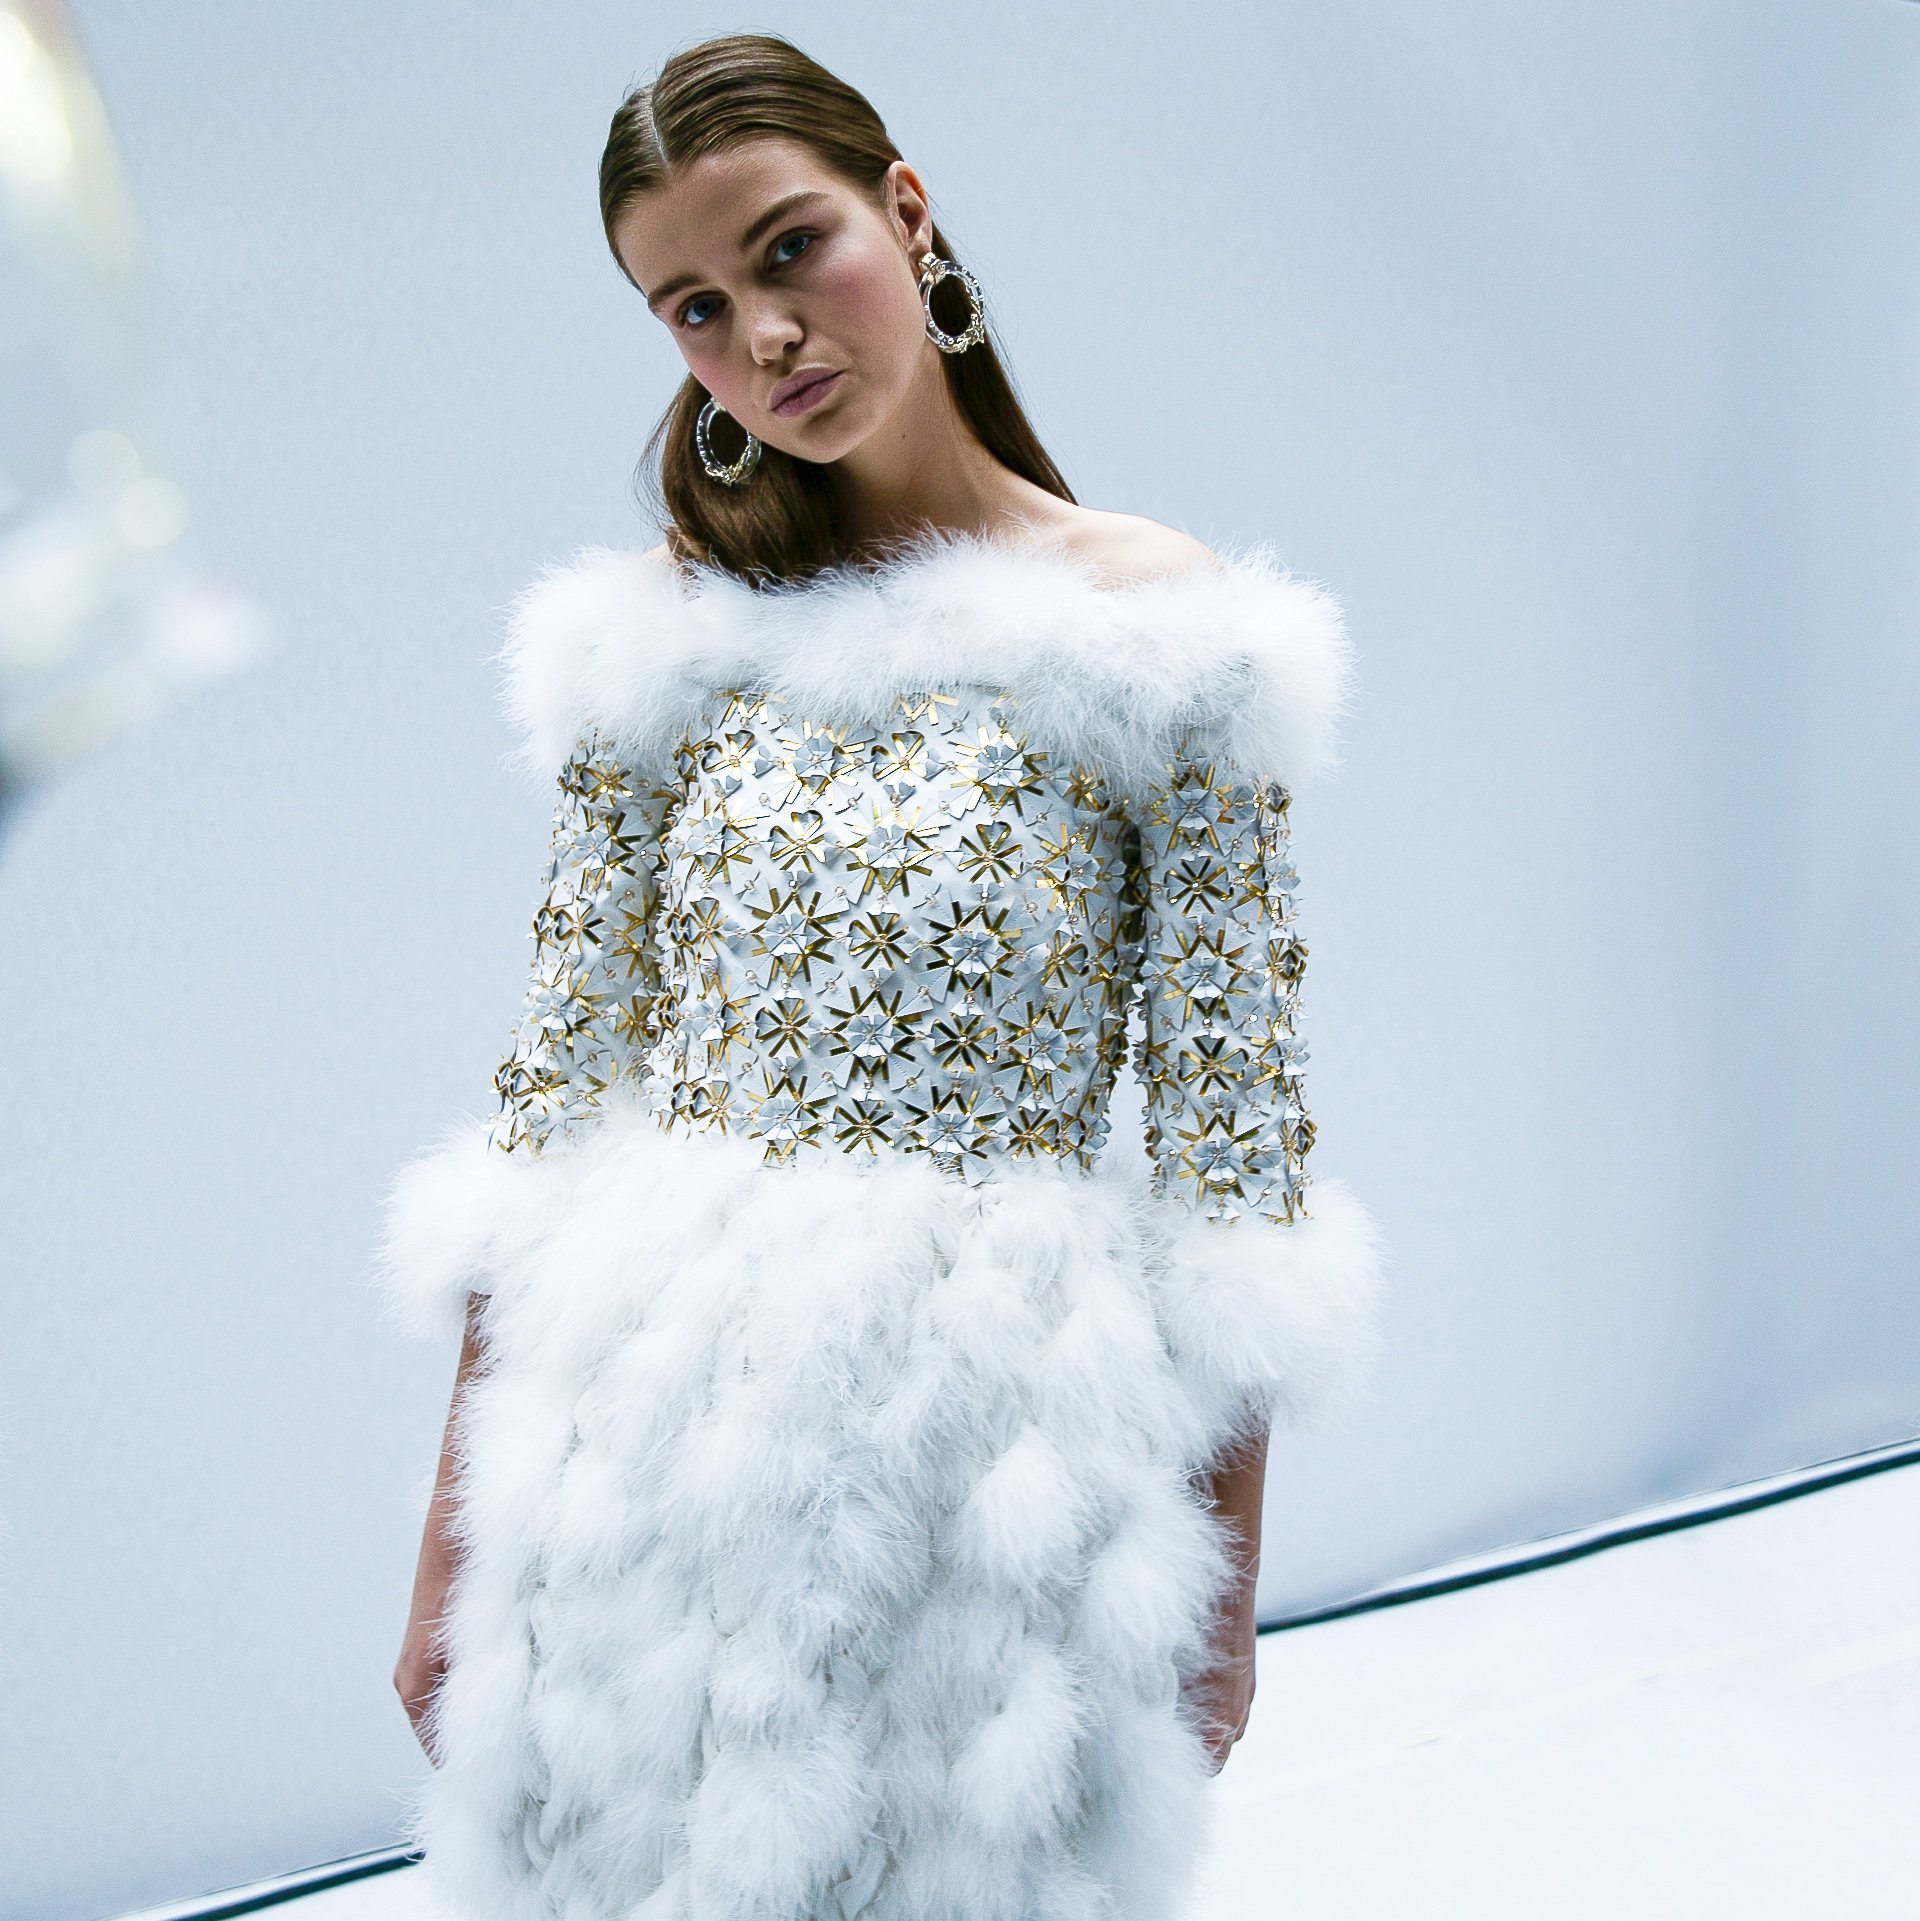 CHANEL on X: Luna Bijl closed the #CHANELFallWinter show wearing a dress  in chiffon and feathers, the bust embroidered with snowflakes in gold  vinyl. #CHANELintheSnow #PFW  / X